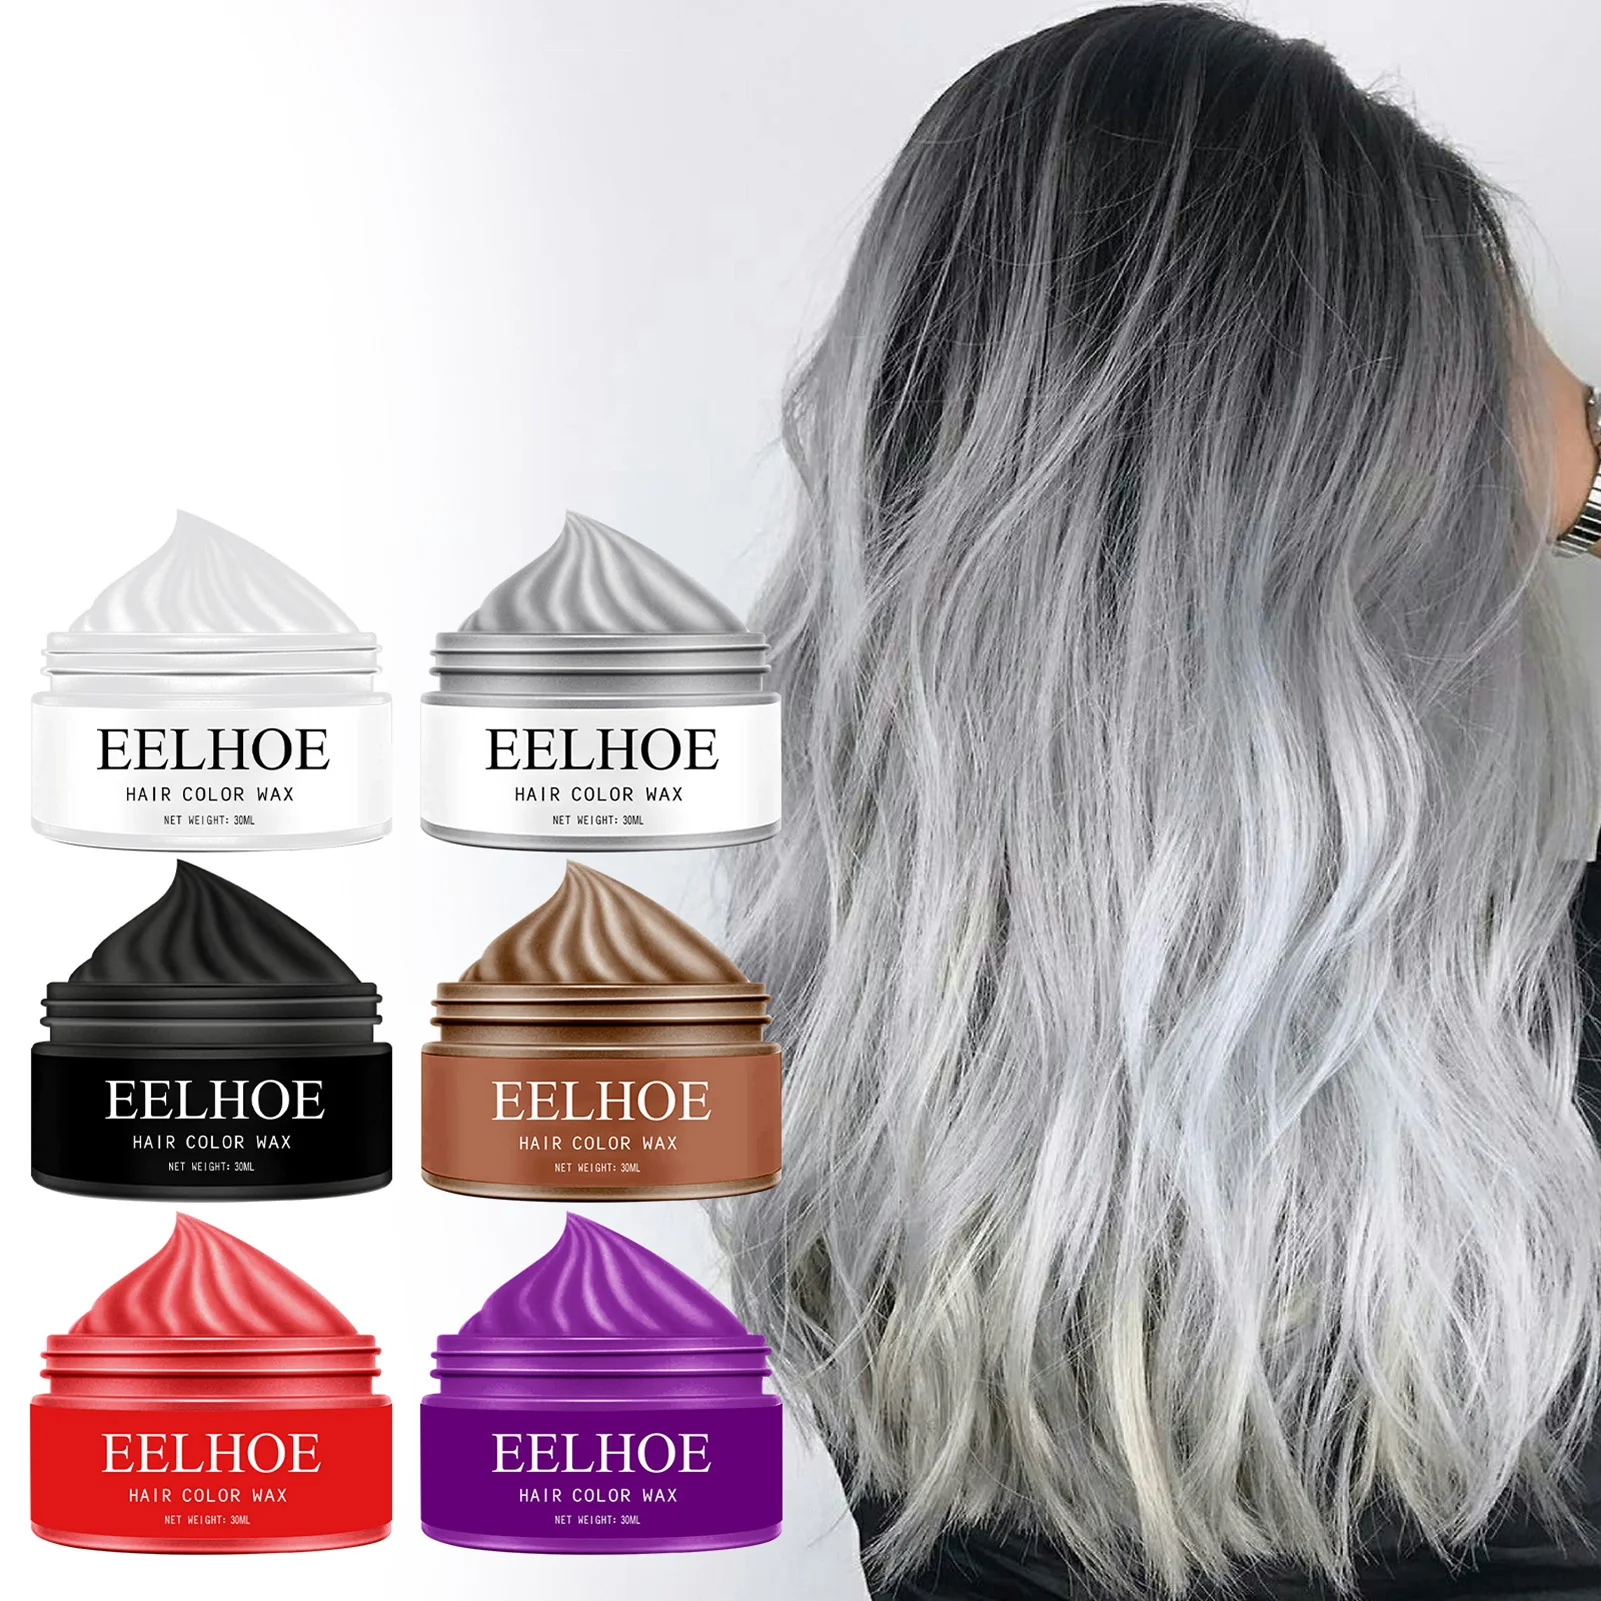 6 Colors Hair Color Wax Instant Hair Coloring Temporary Hair Colorful  Shampoo Cosplay Party Makeup Women Fashion Hair Supplies - AliExpress